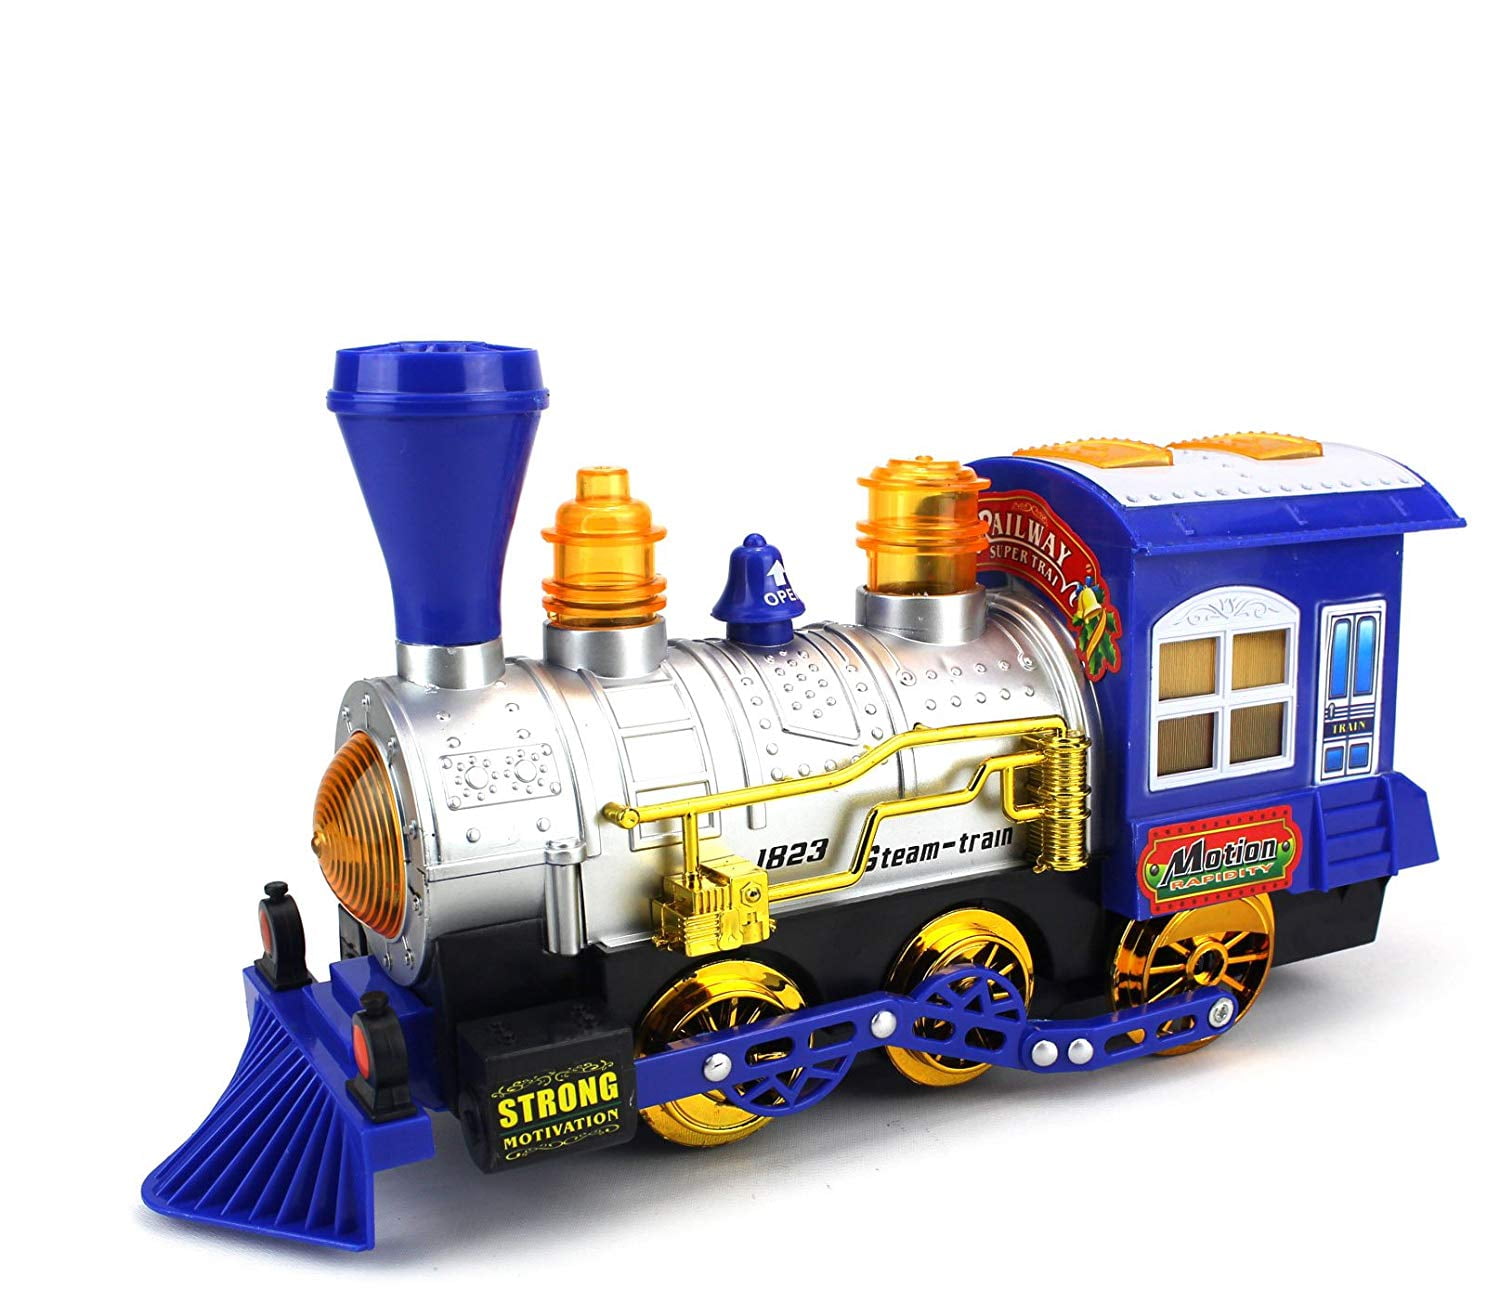 Lights and Bump'n'Go Battery Operated Kids Toy Blowing Bubble Train Car Music 